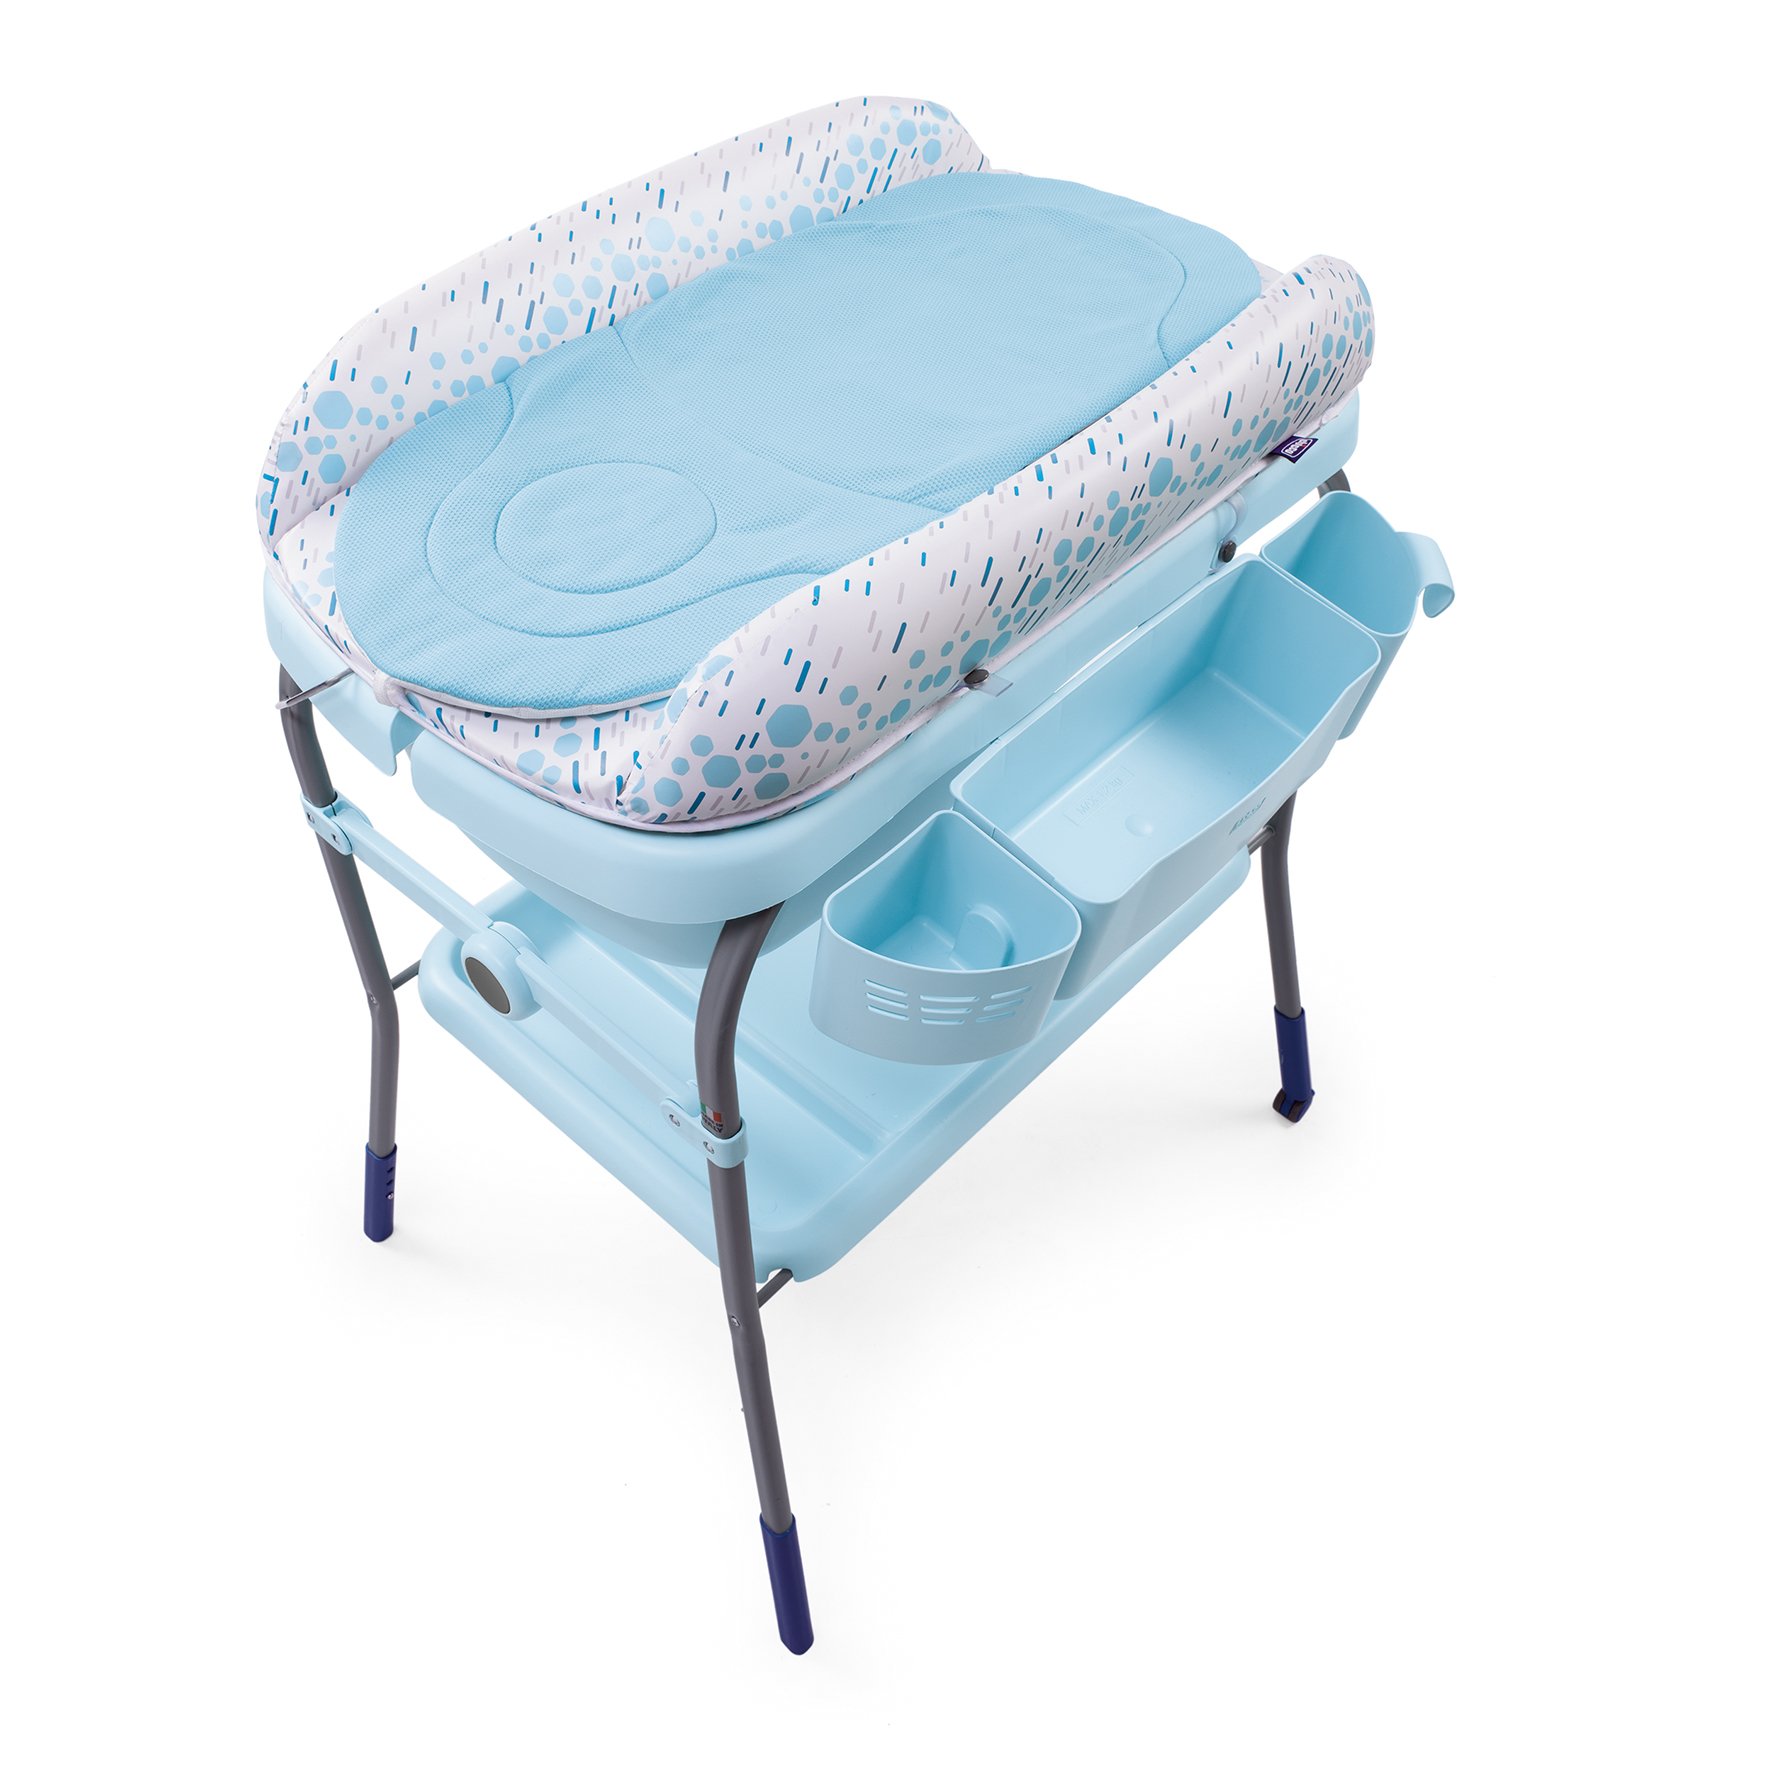 Chicco Baby Stroller For Bathing And Changing, Blue Color